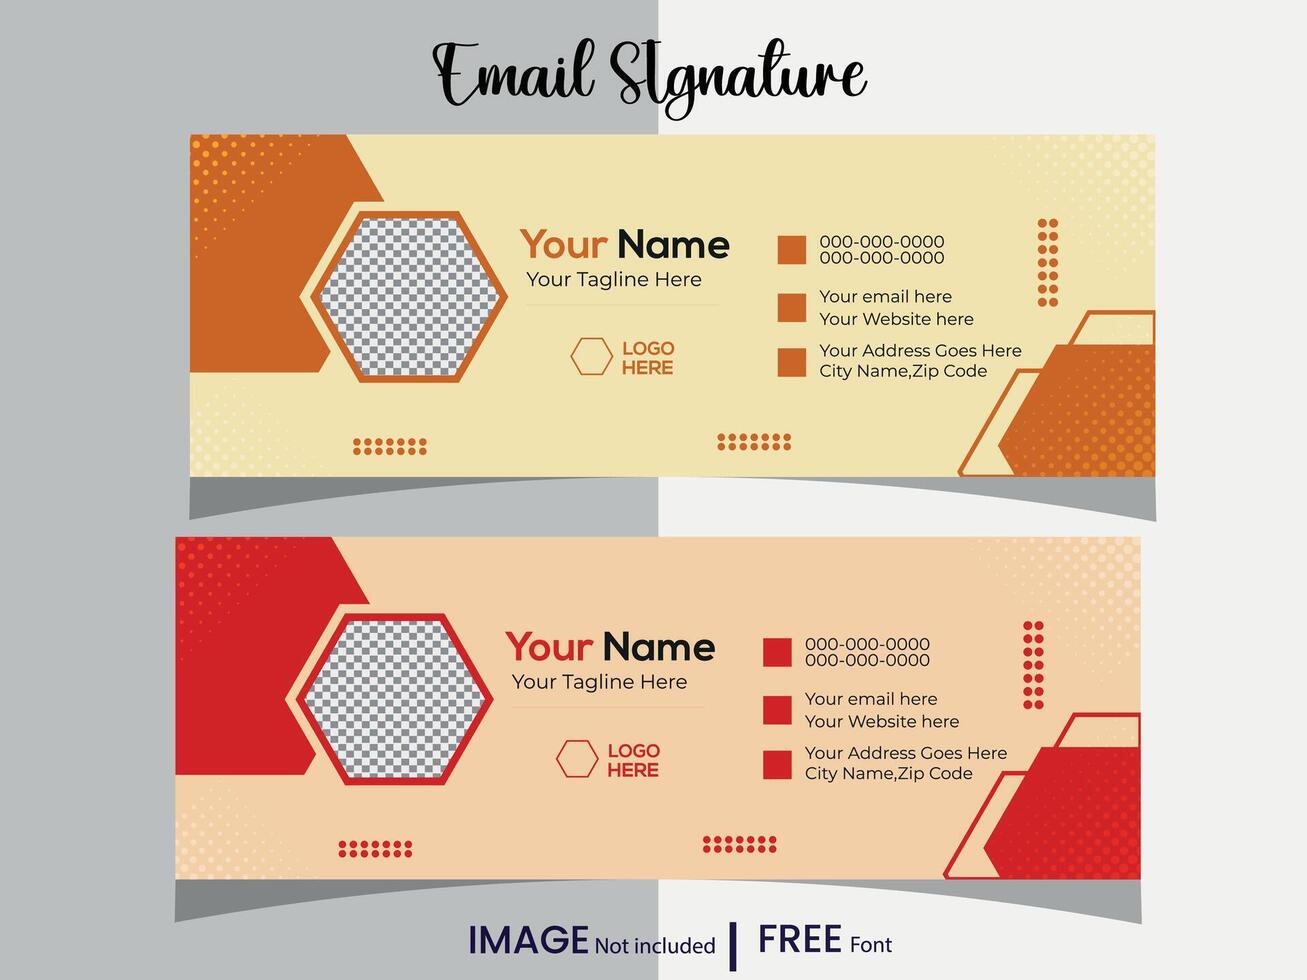 Corporate business professional modern email signature template or email footer and personal social media cover template design creative layout vector